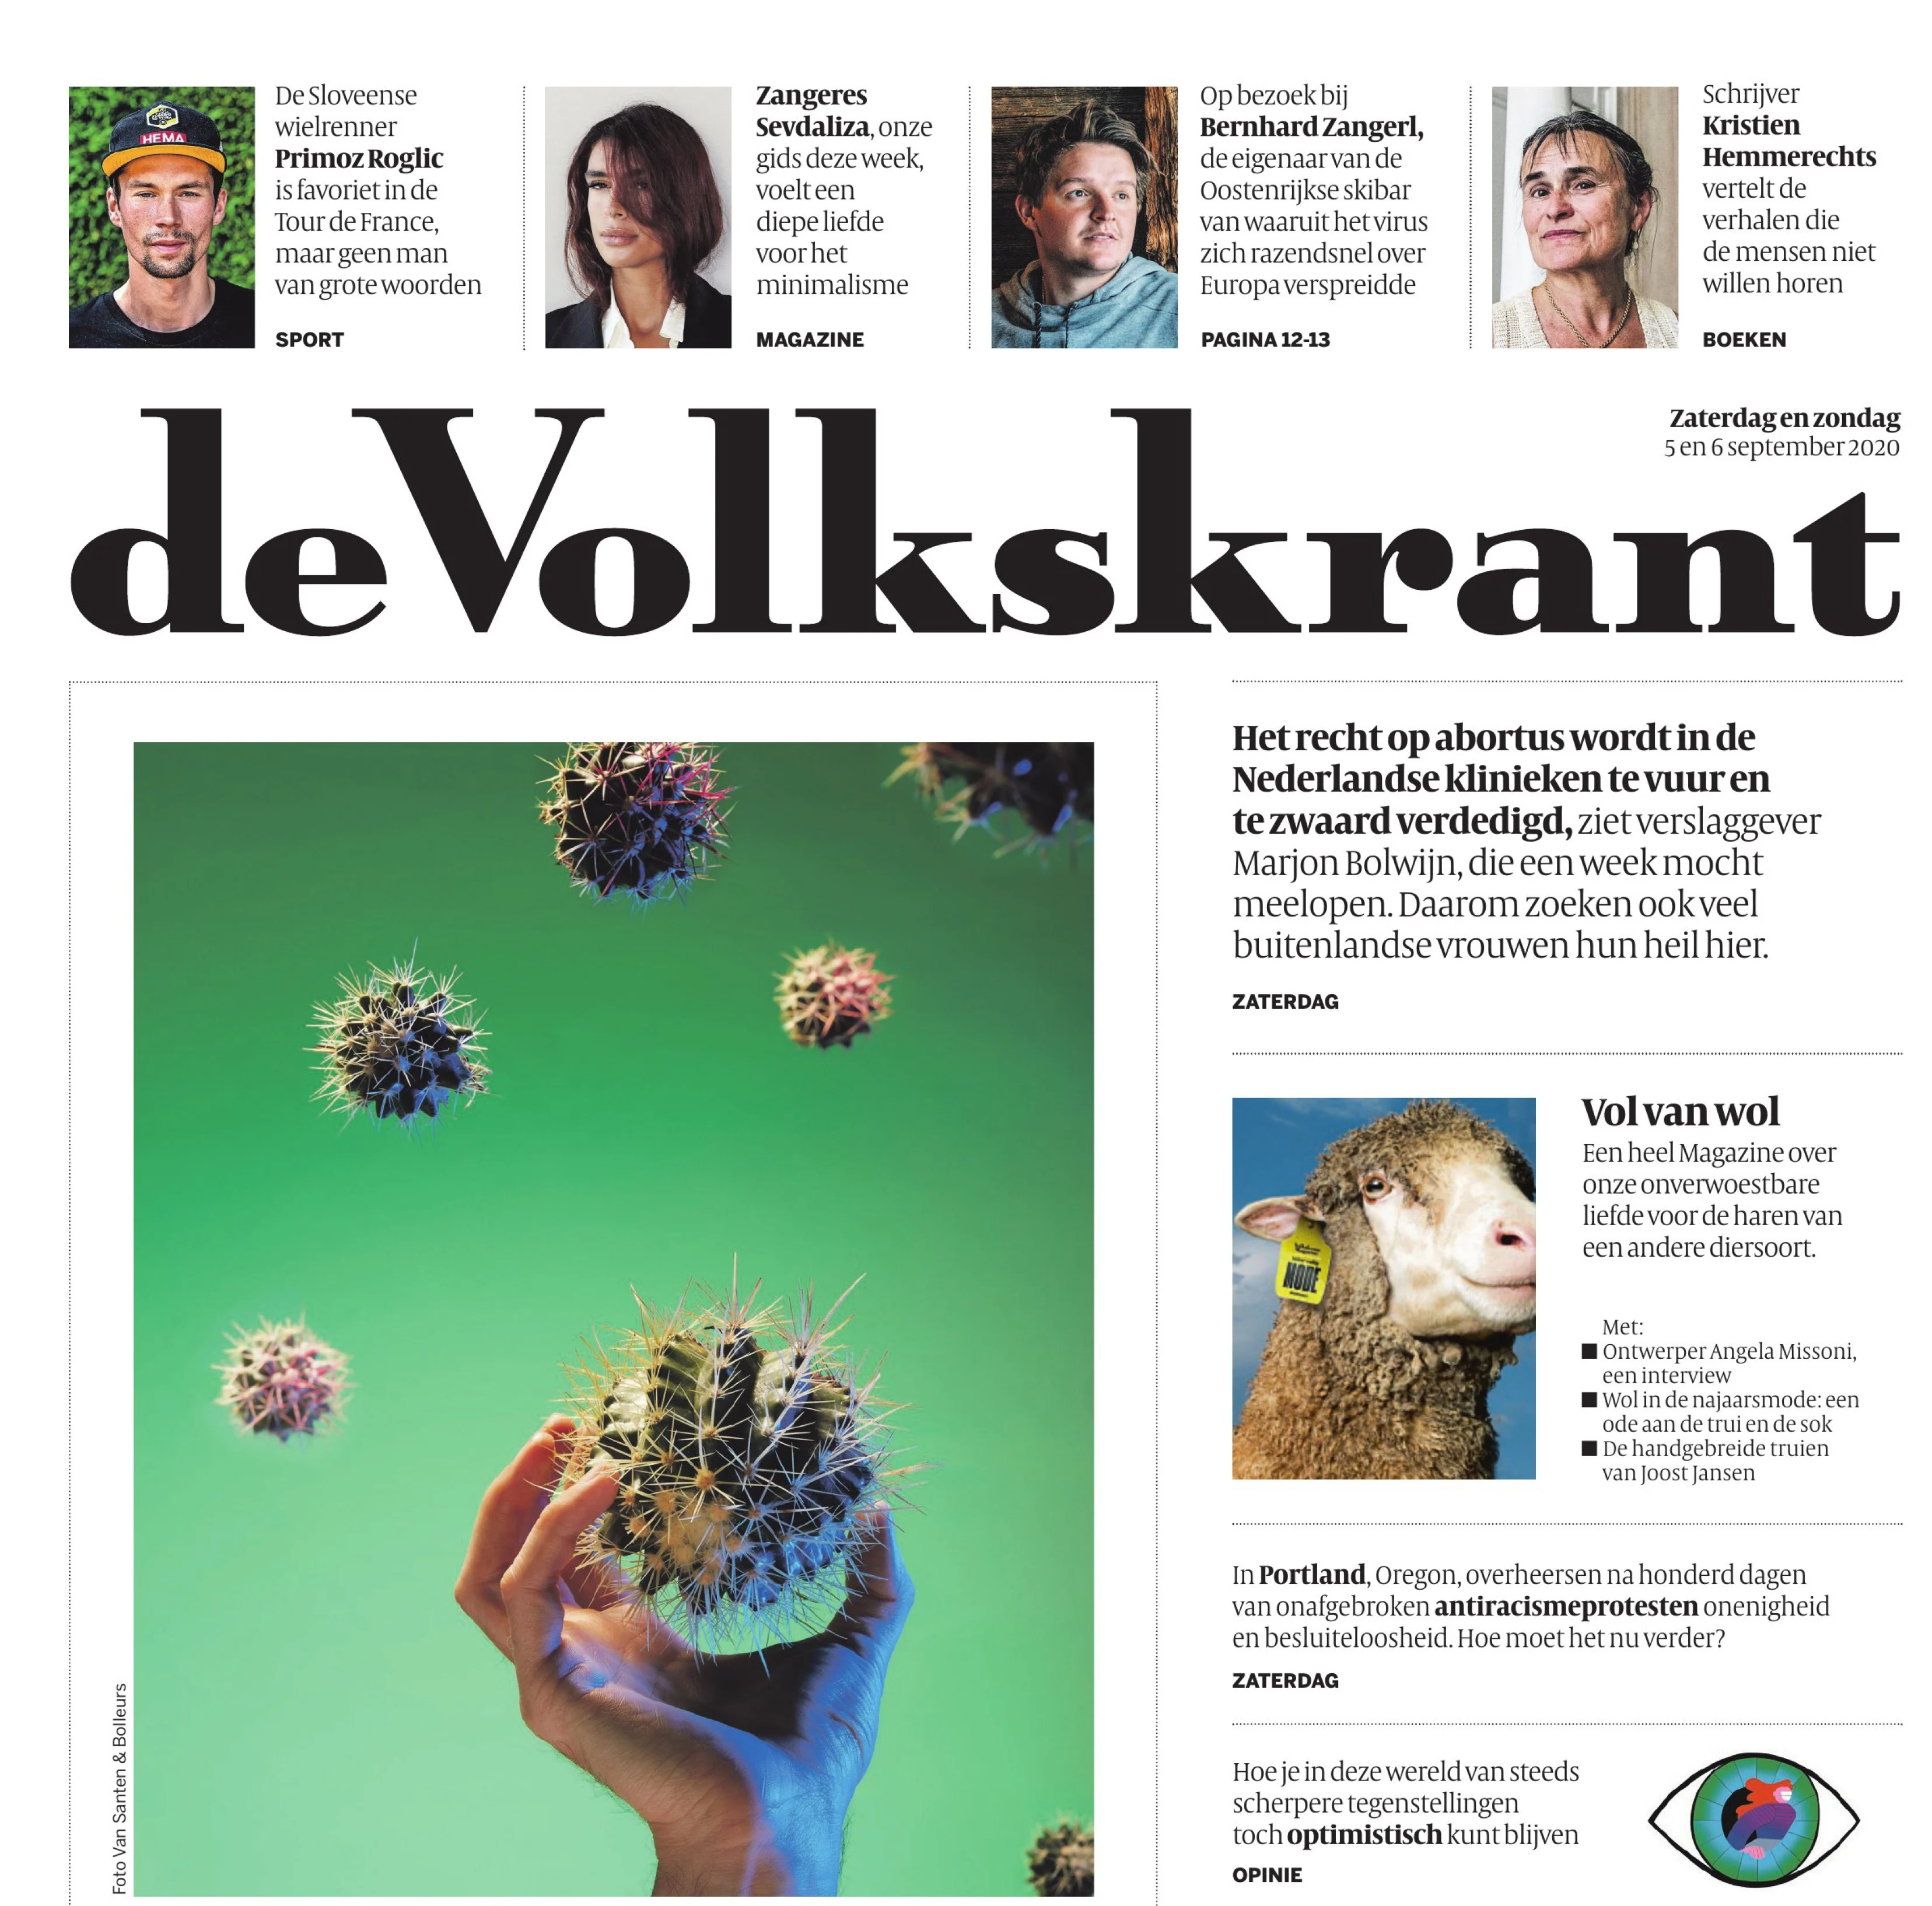 The front page of the newspaper 'De Volkskrant'